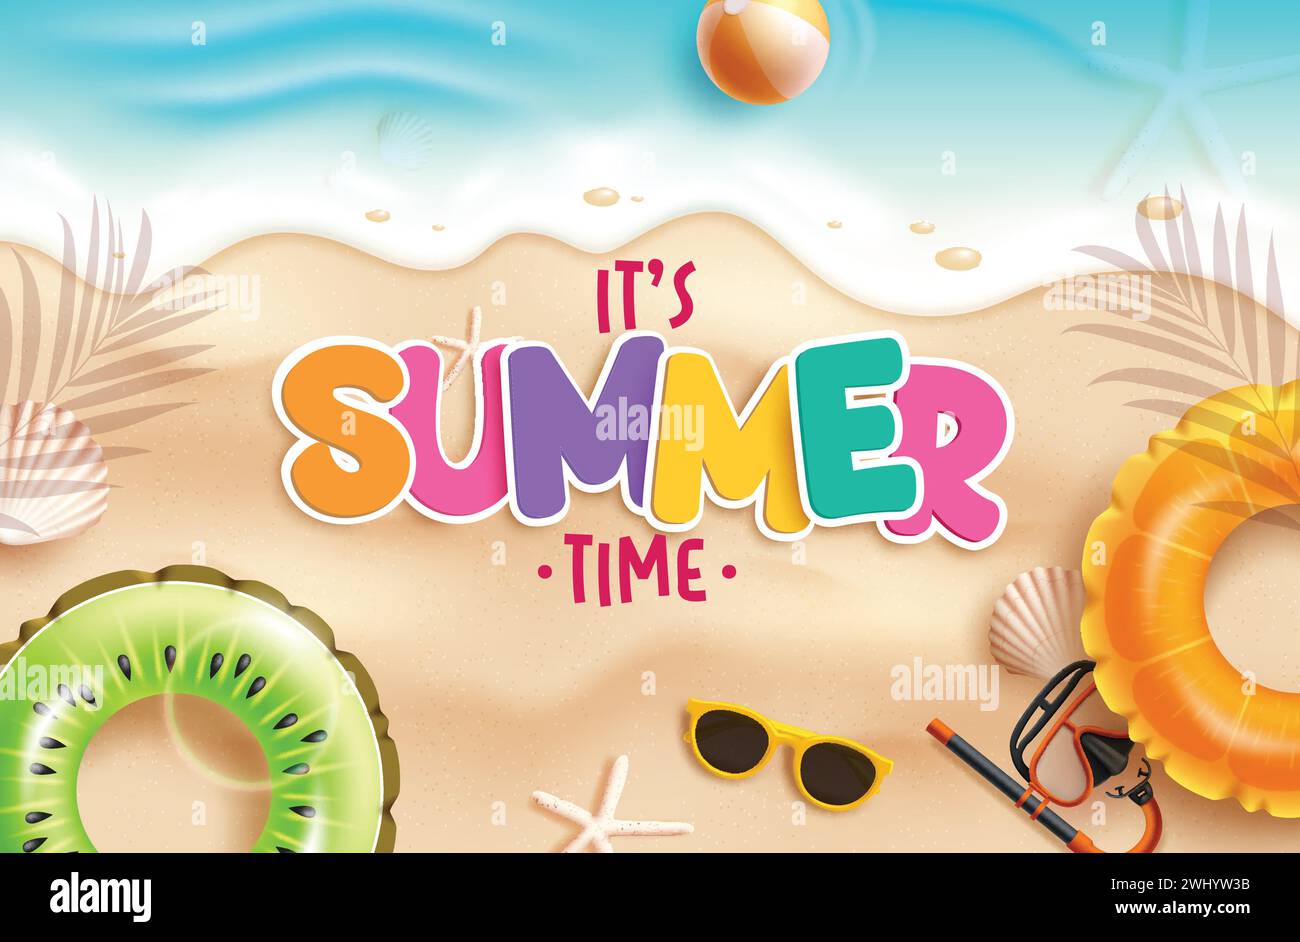 Summer time text vector design. It's summer time greeting text in seashore and beach sand with floaters, sunglasses and seashells elements decoration Stock Vector